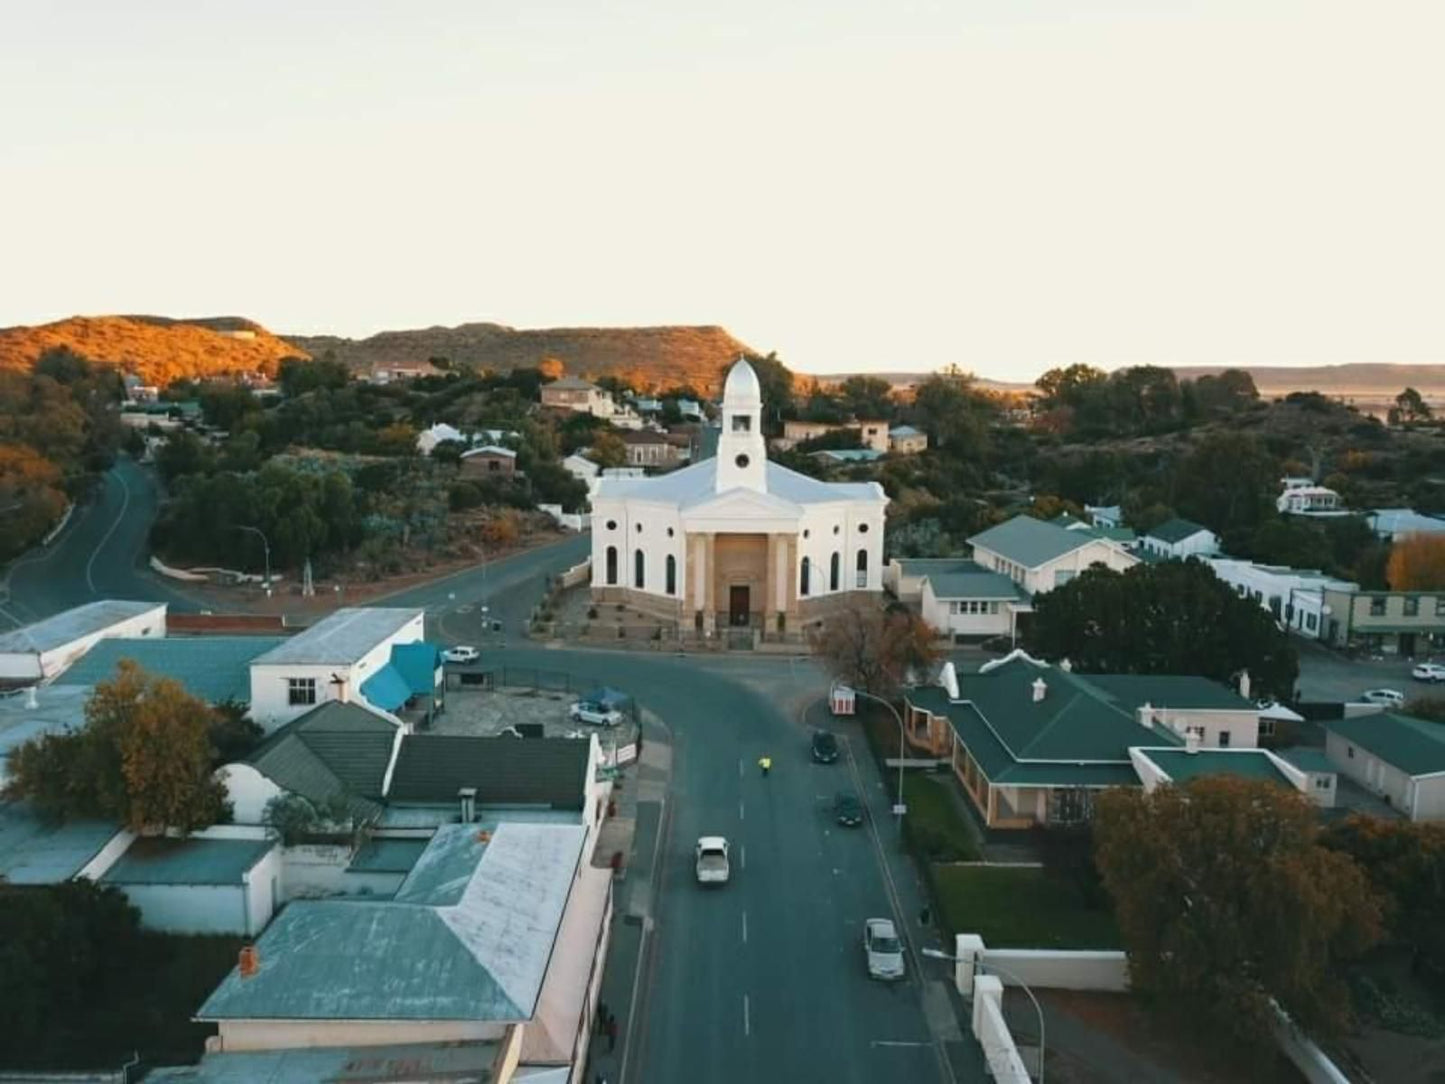 De Vuur Guesthouse Colesberg Colesberg Northern Cape South Africa Church, Building, Architecture, Religion